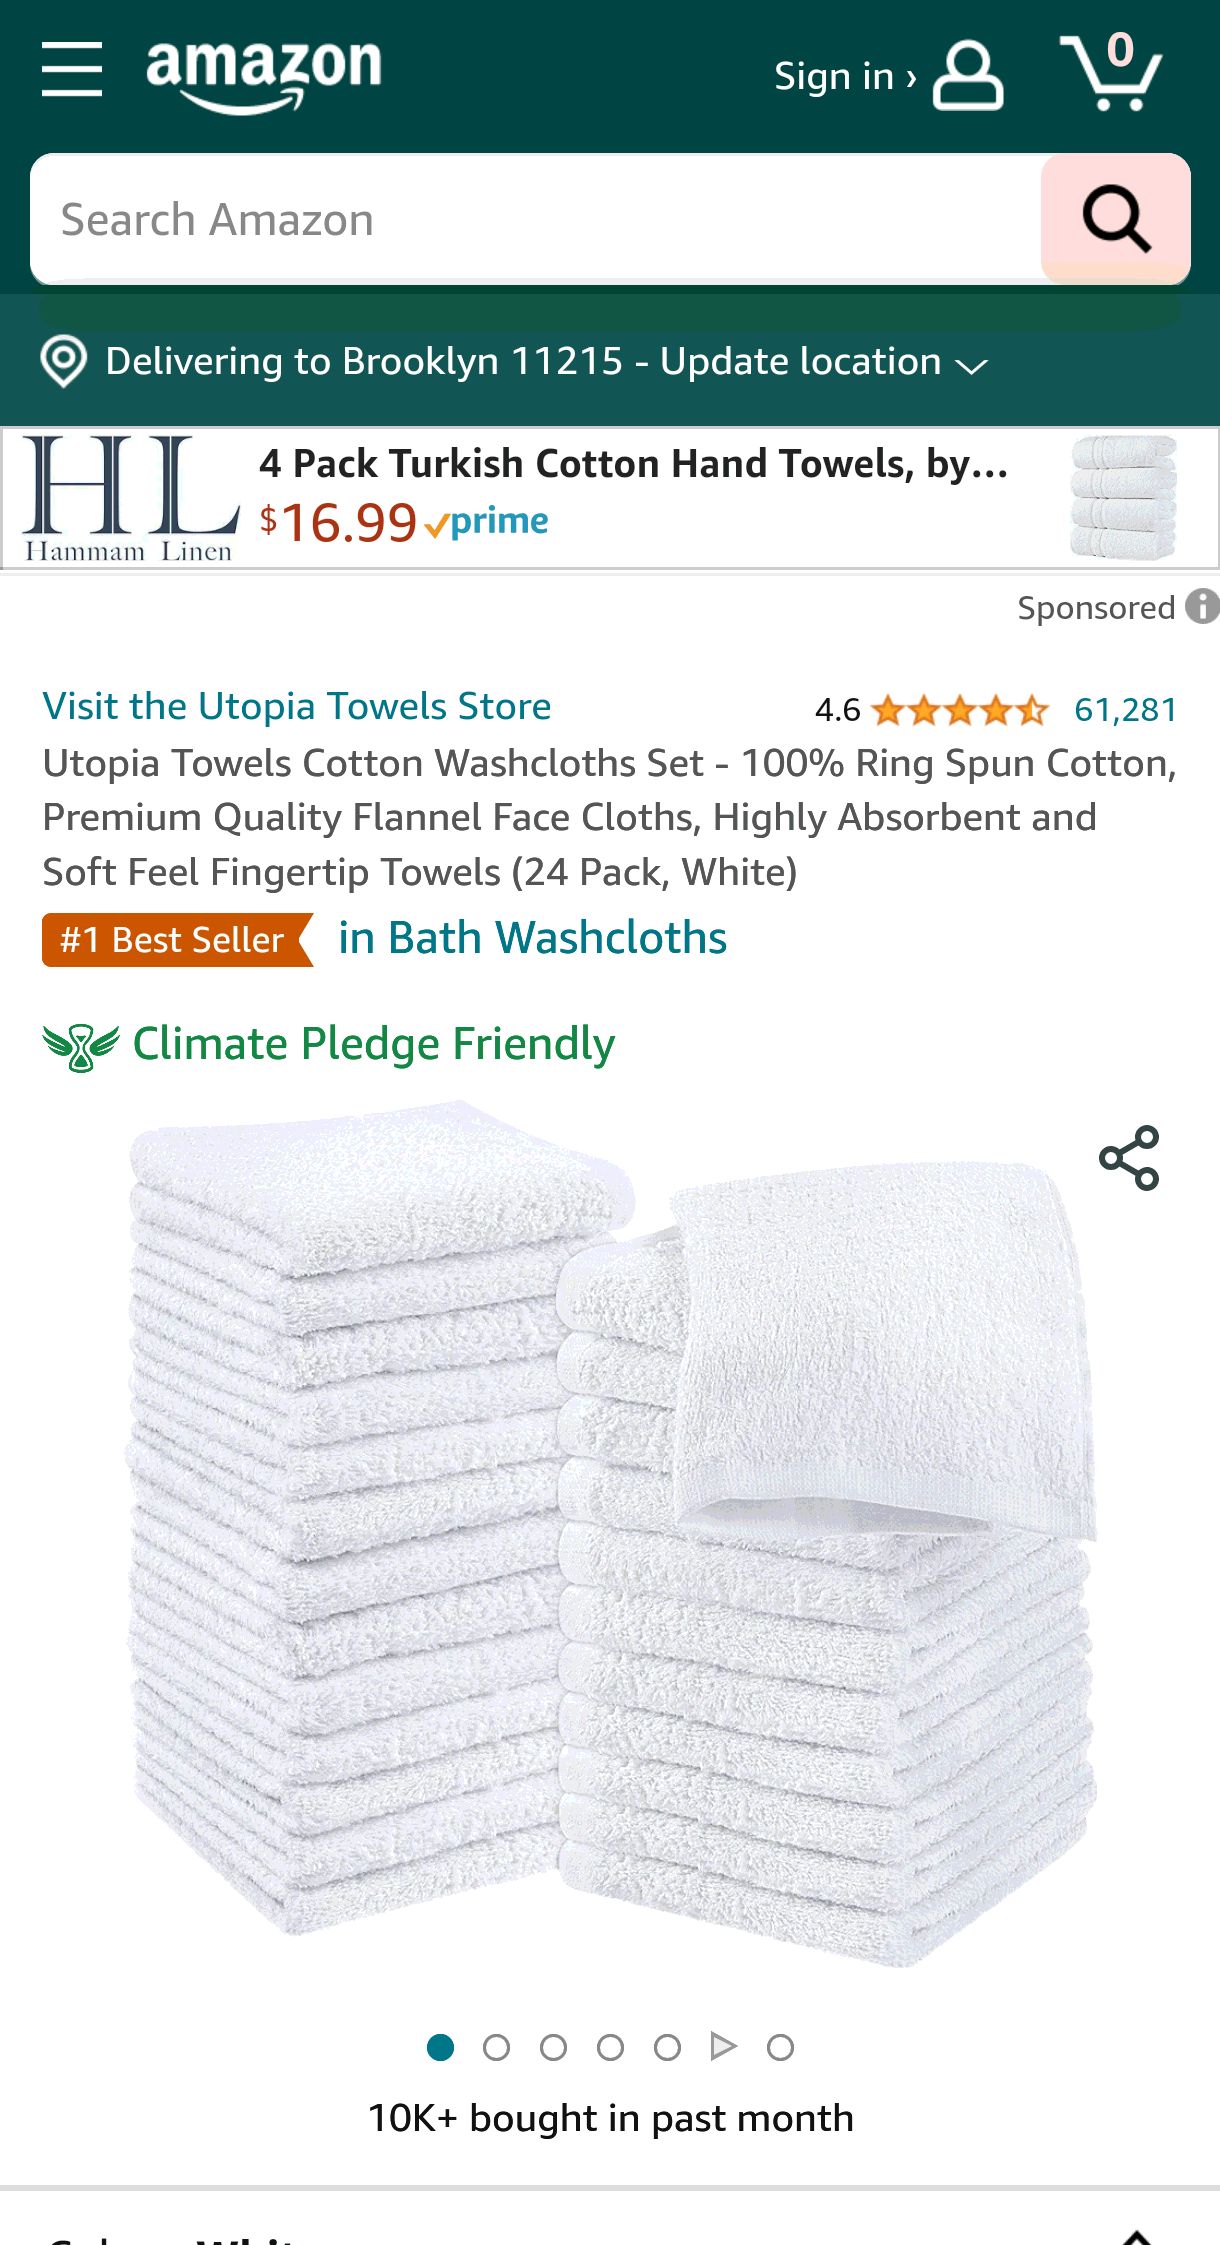 Utopia Towels Cotton Washcloths Set - 100% Ring Spun Cotton, Premium Quality Flannel Face Cloths, Highly Absorbent and Soft Feel Fingertip Towels (24 Pack, White) : Home & Kitchen